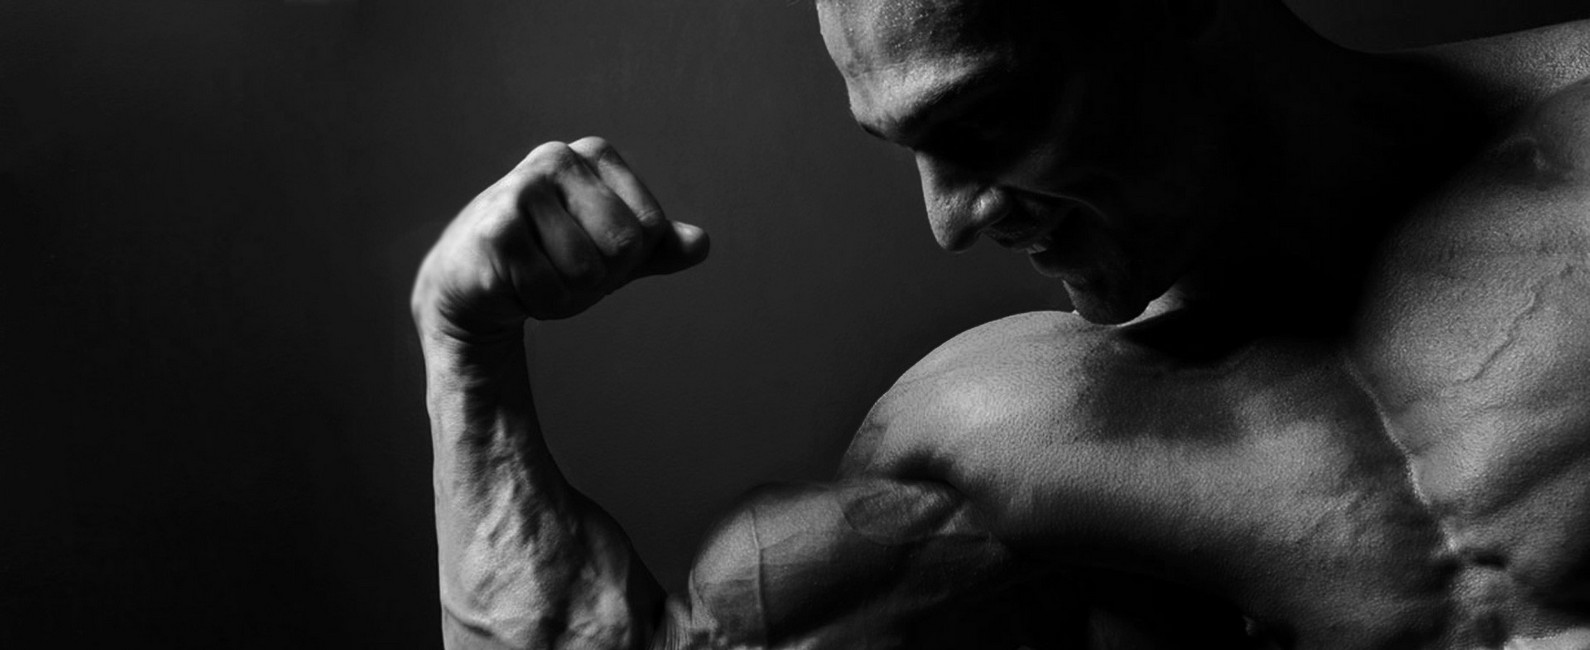 Muscle growth steroids side effects